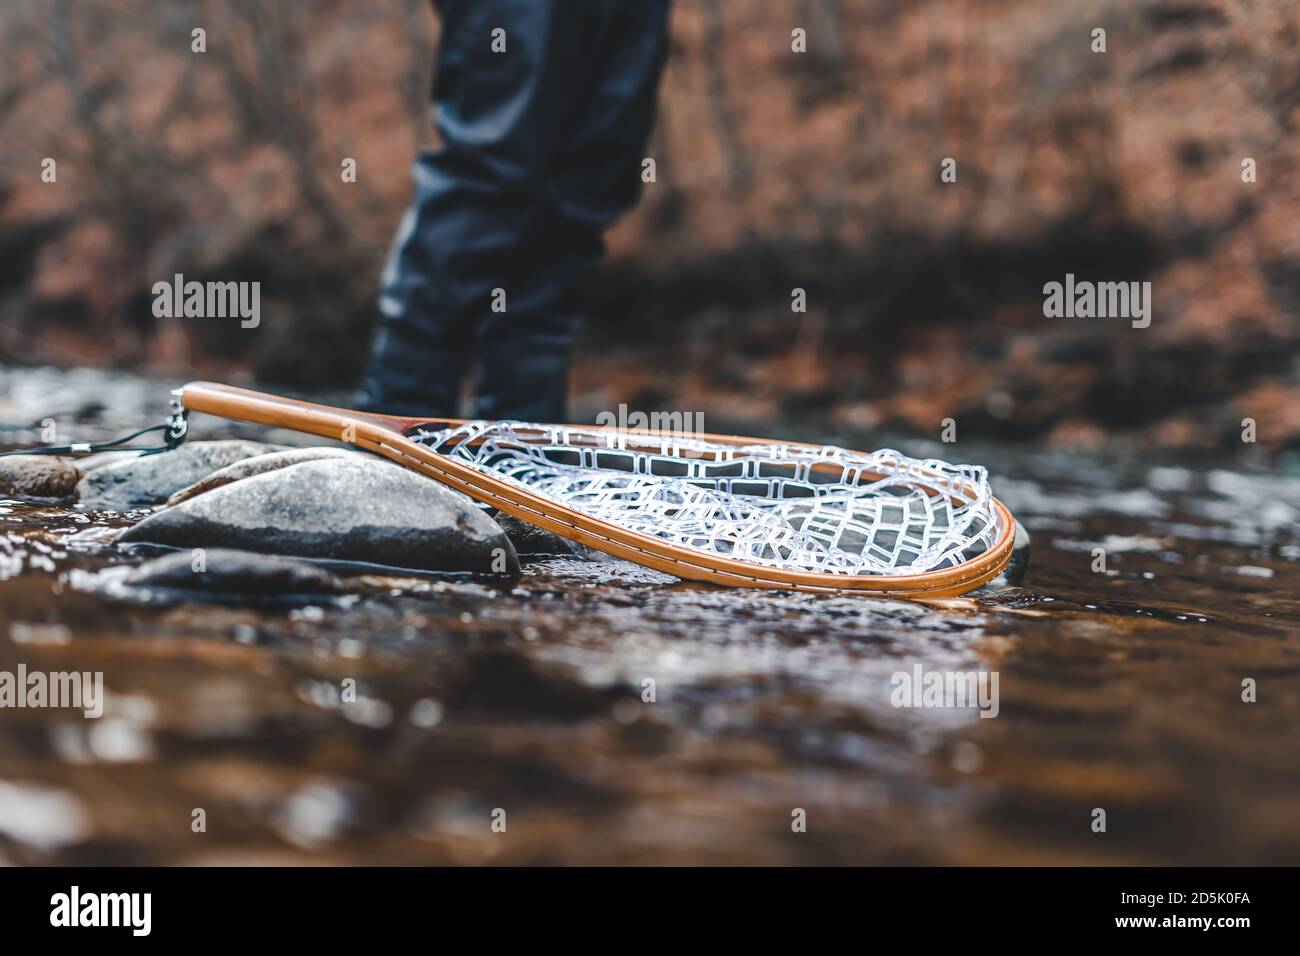 Fishing landing net on rocks in river with blured fisherman behind. Stock Photo